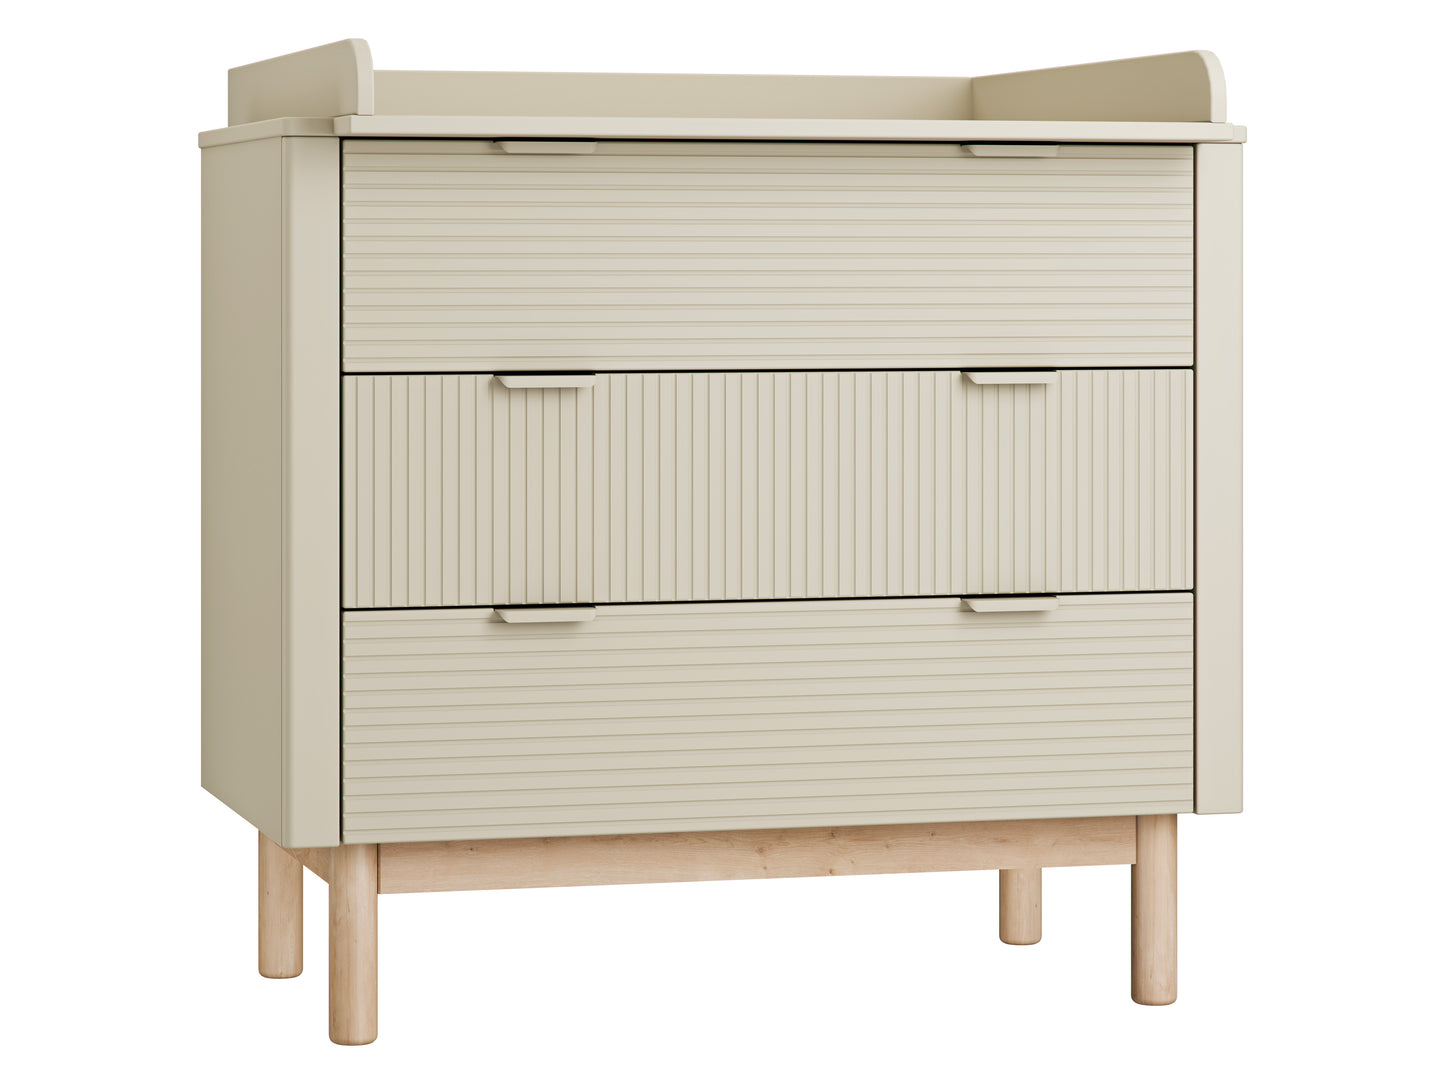 Pinio, Miloo Chest of 3 drawers, Champagne